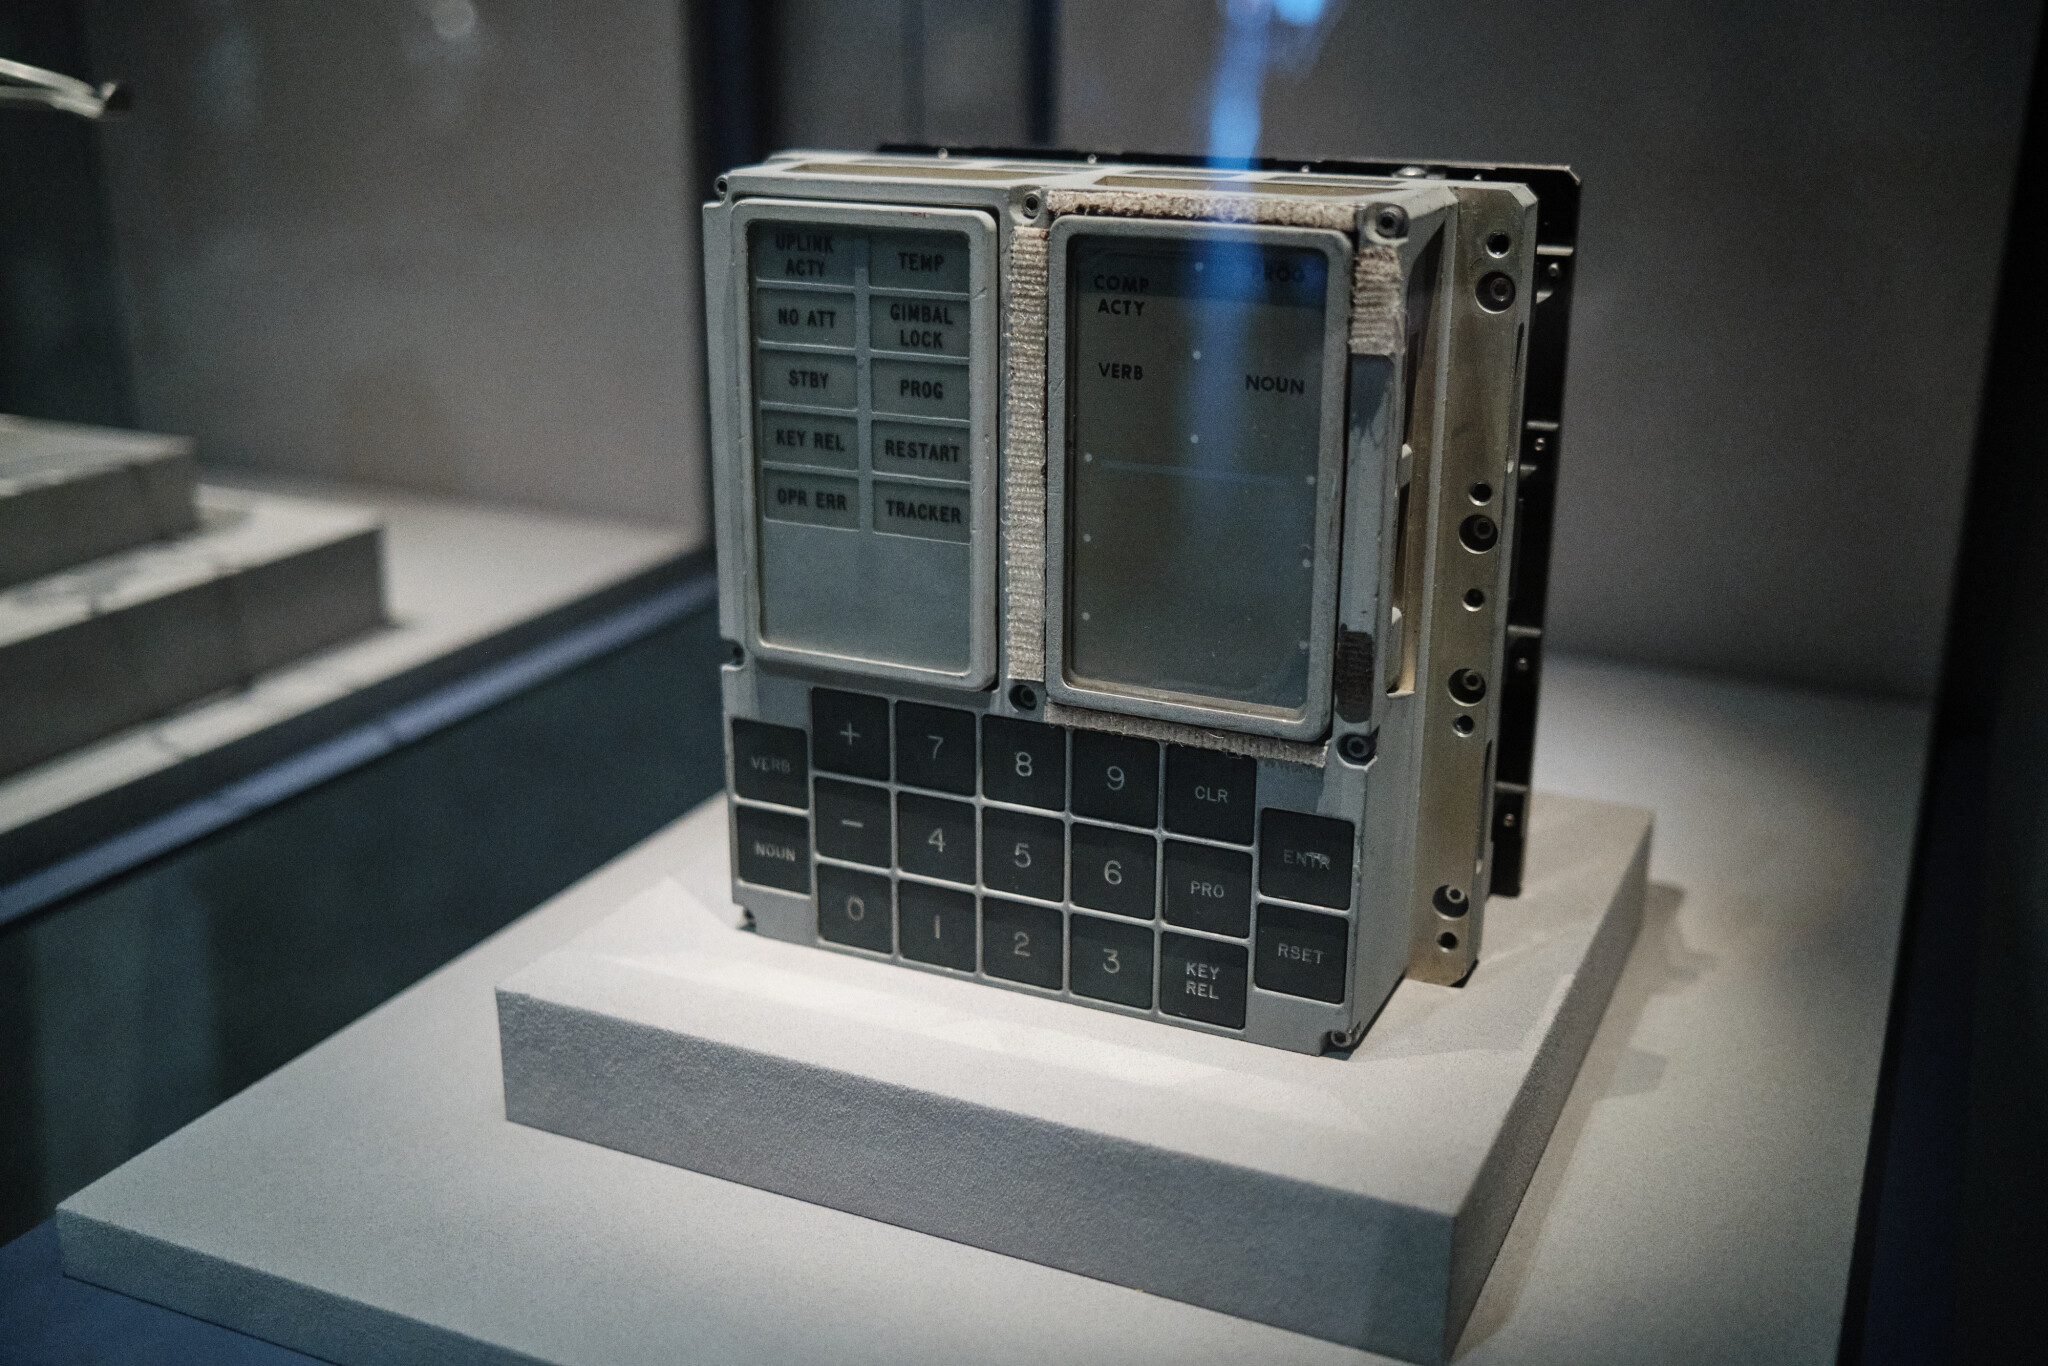 Apollo Guidance Computer Display and Keyboard (DSKY) Unit